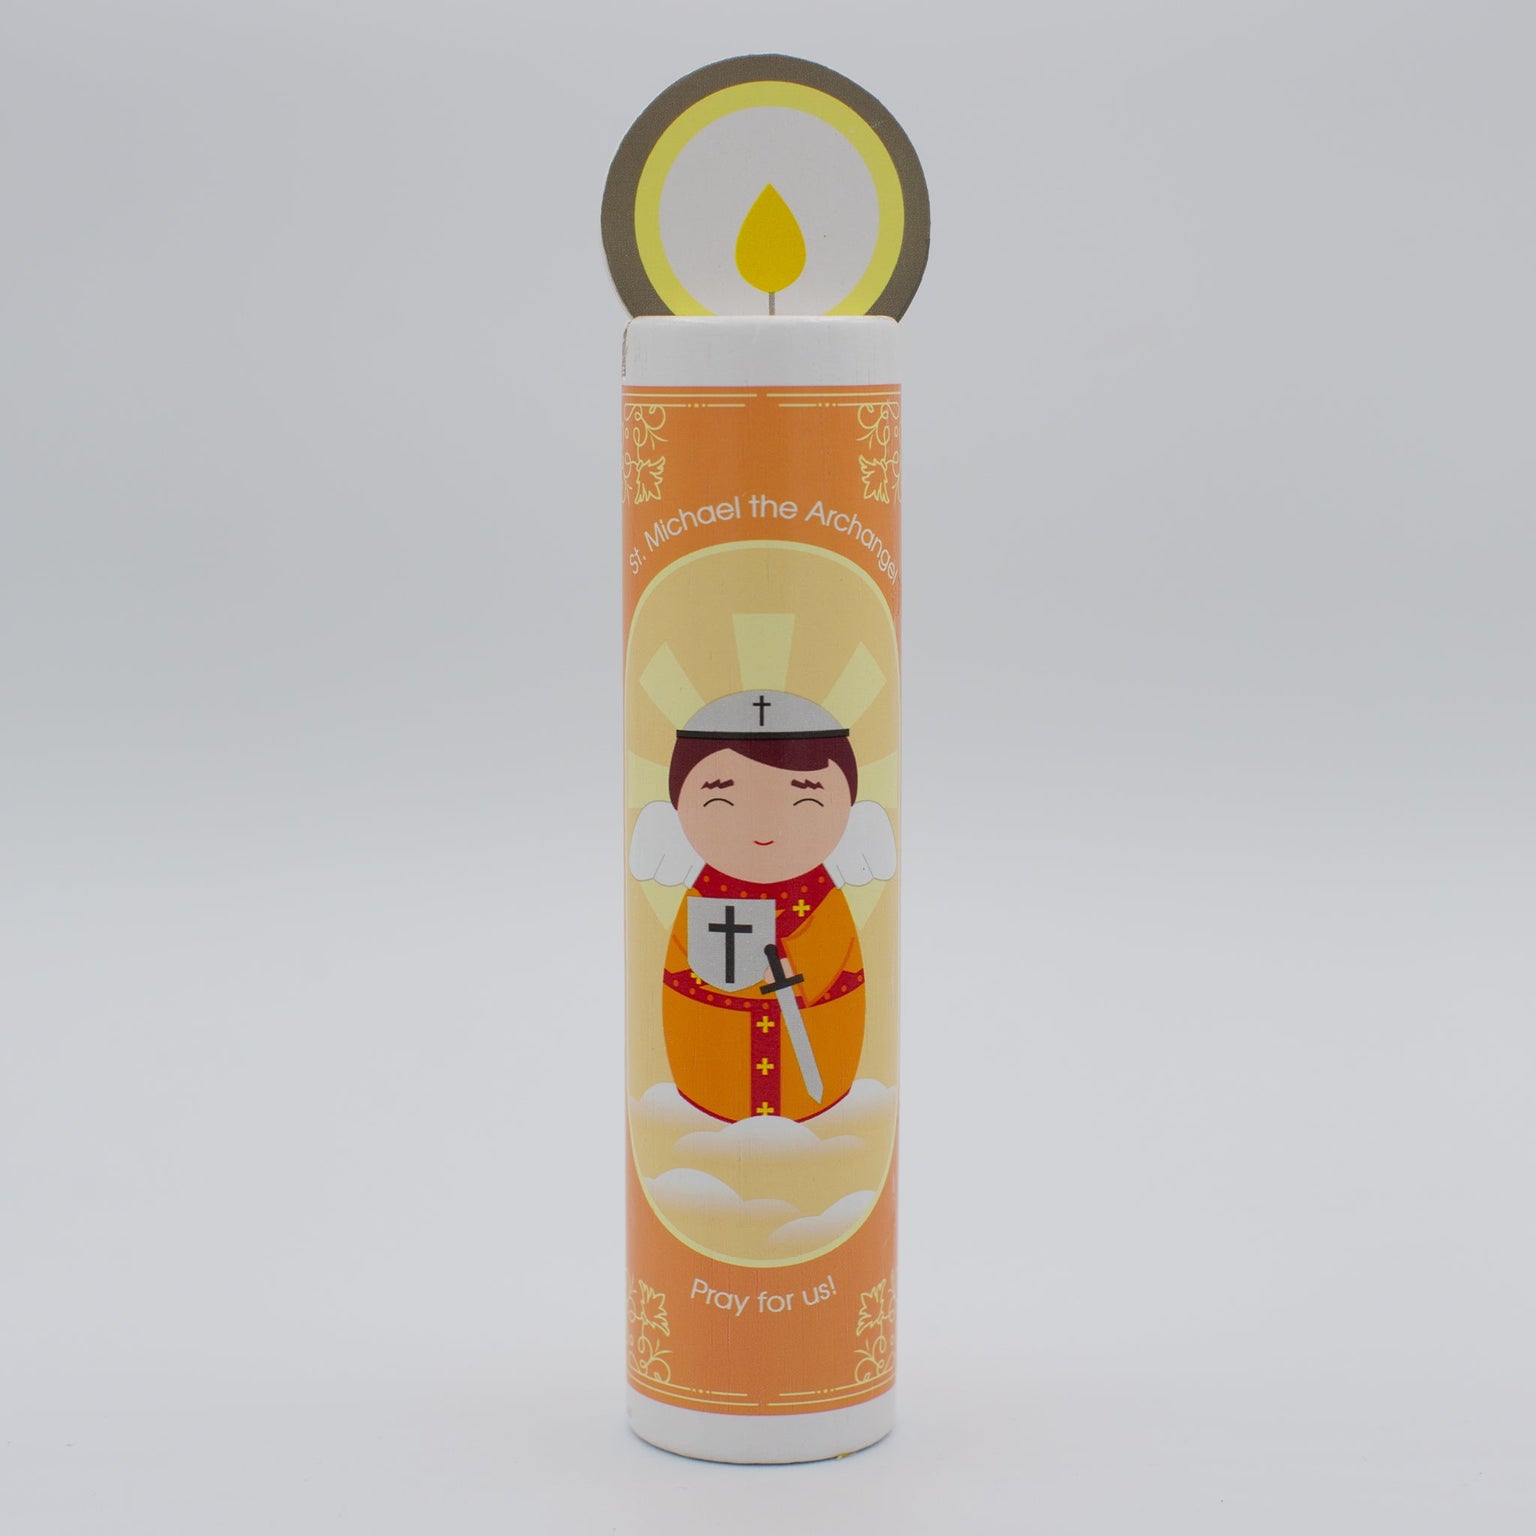 St. Michael Wooden Prayer Candle